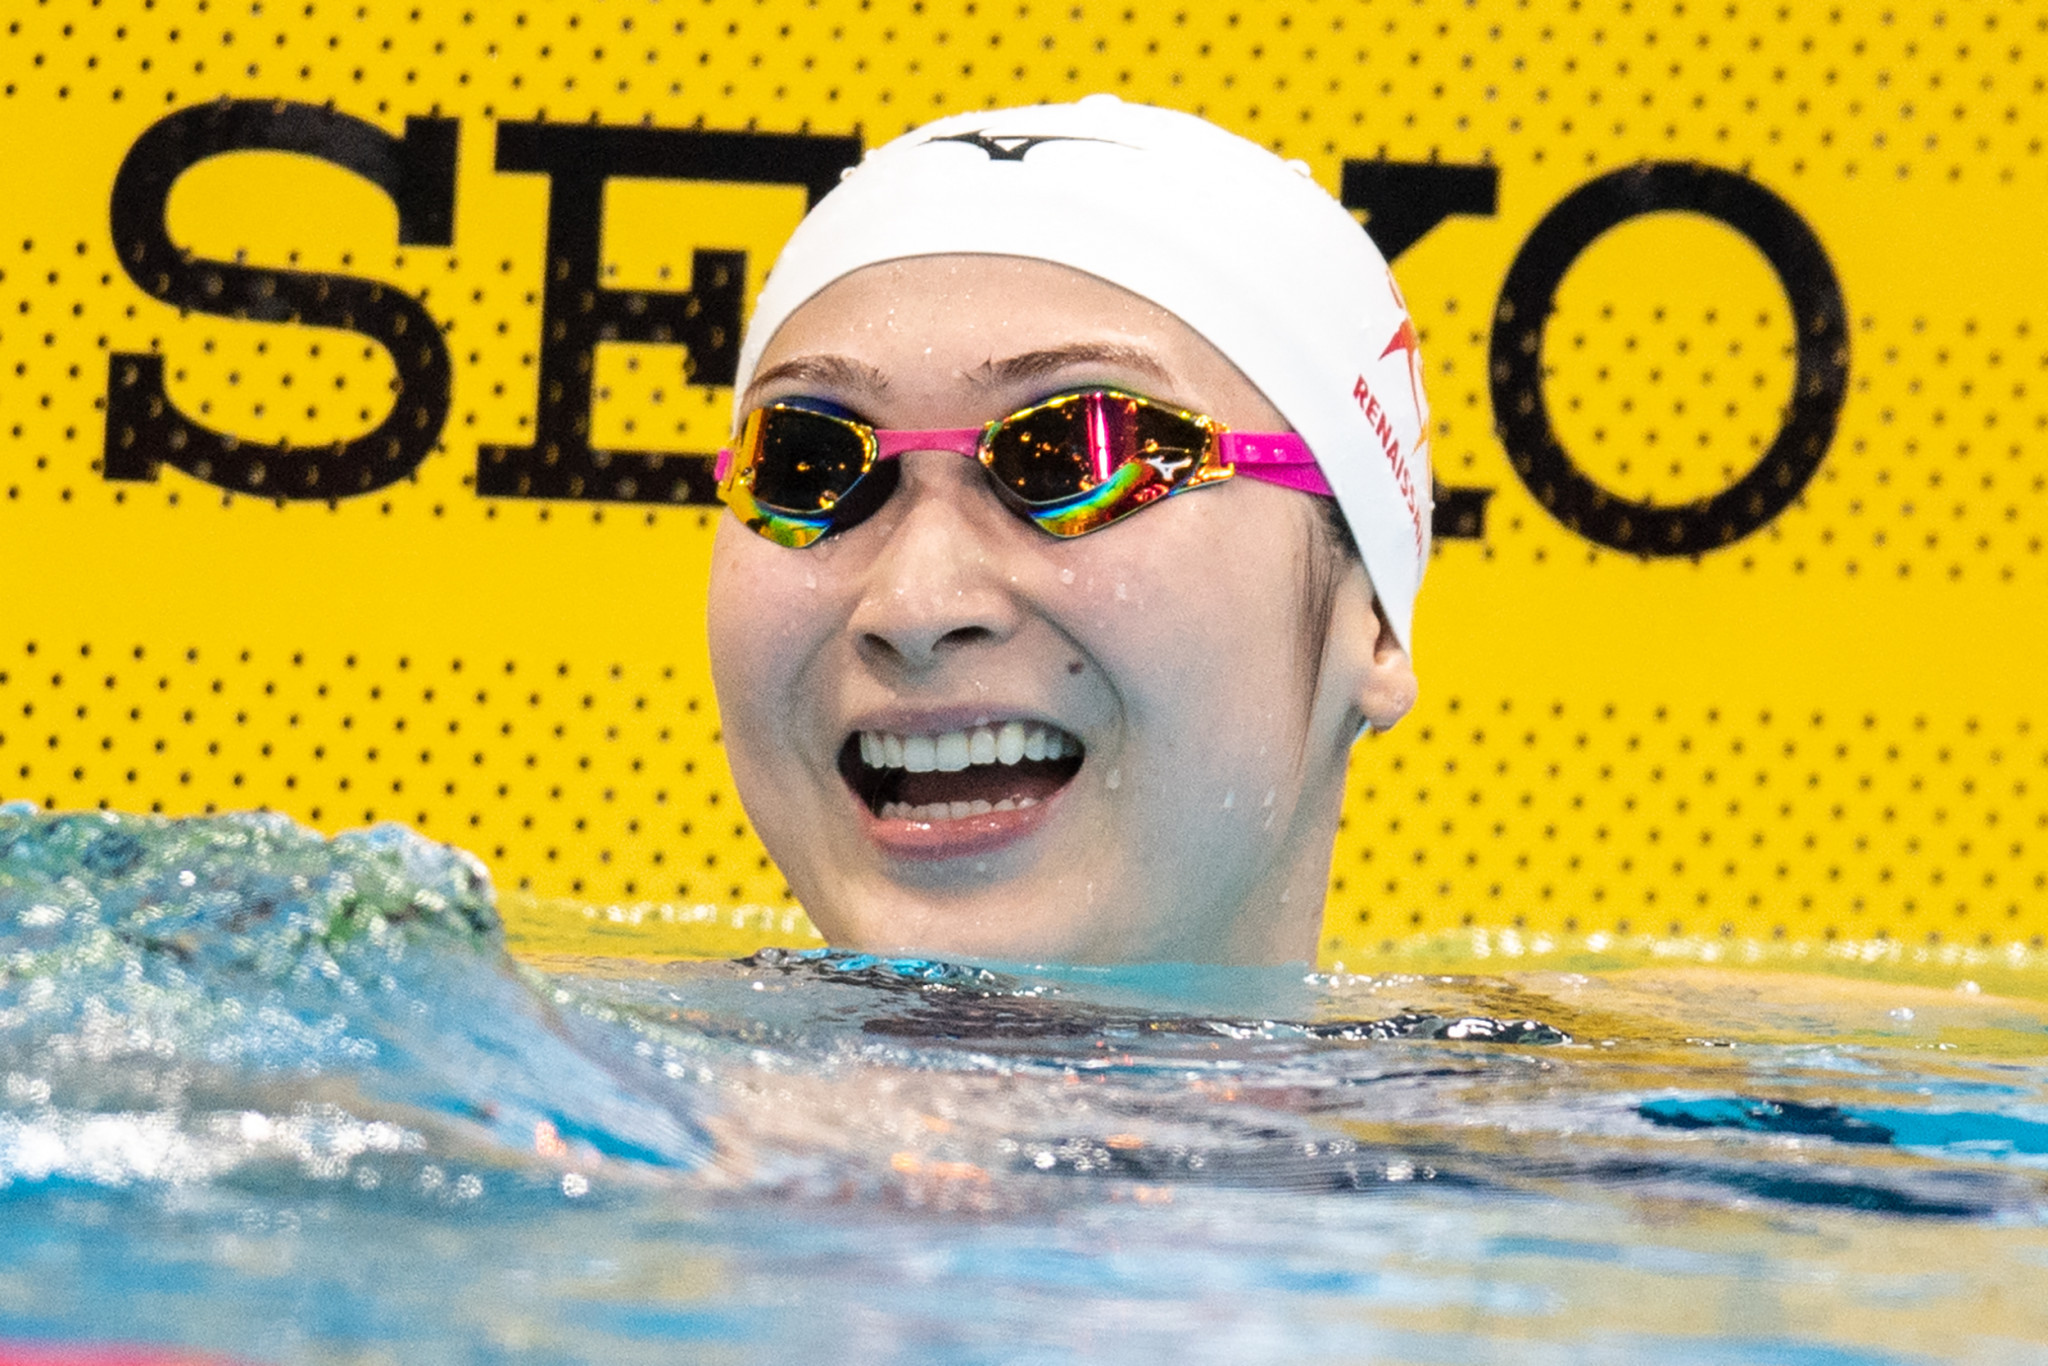 Japanese swimmer Ikee secures another Tokyo 2020 berth following cancer recovery